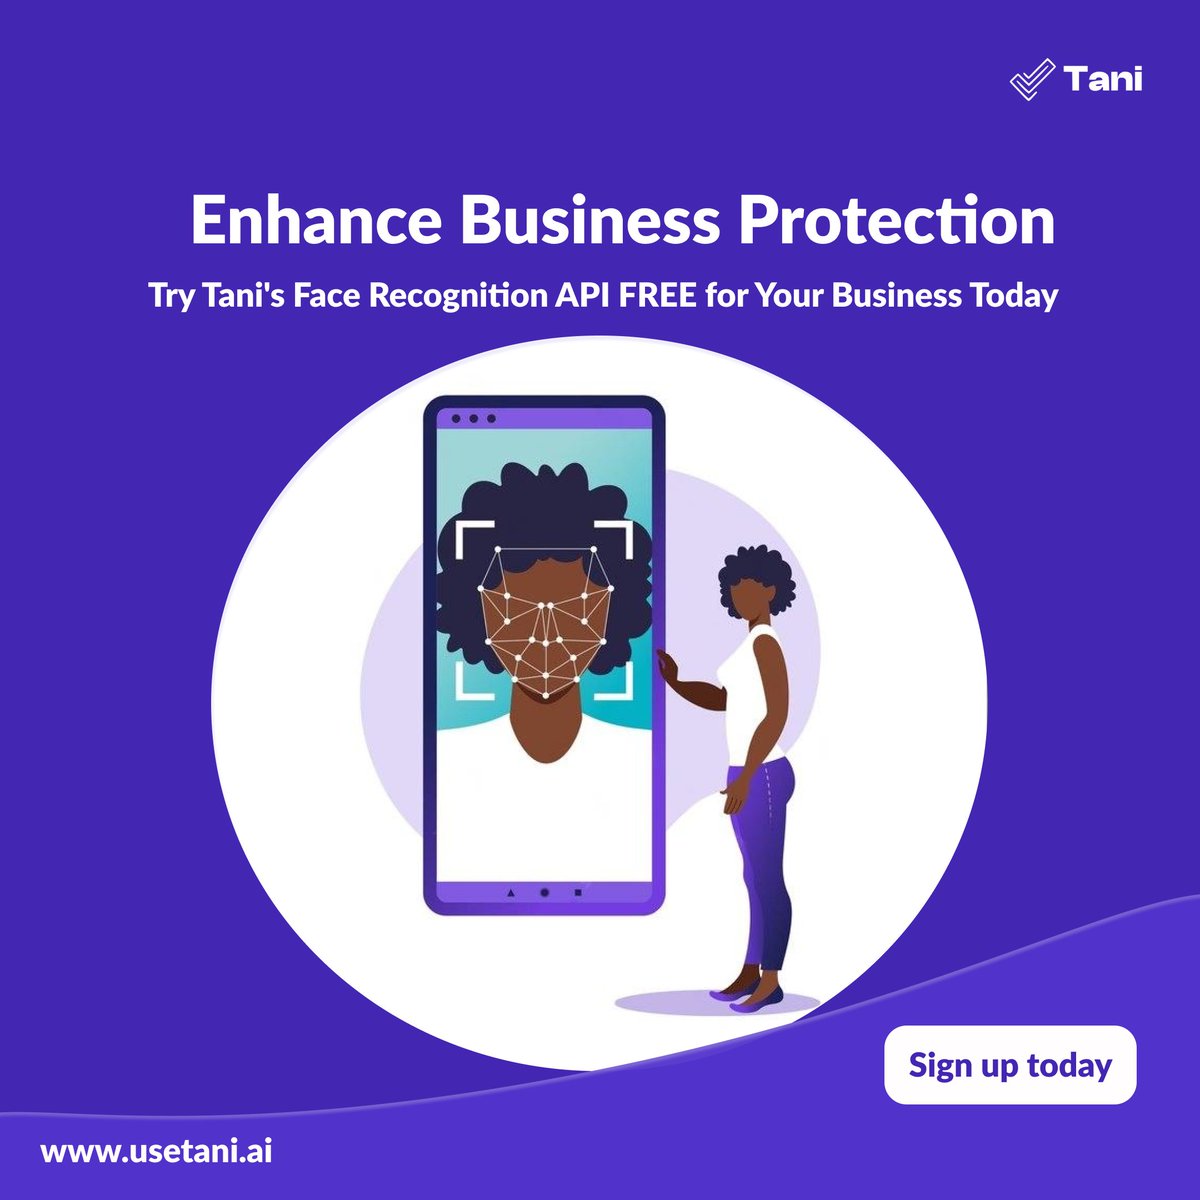 Elevate your business security with Tani's cutting-edge face recognition technology! Whether you're in fintech, academia, real estate, or entrepreneurship, our free trial offers unparalleled protection. Sign up now to safeguard your assets  #BiometricSecurity #BusinessProtection